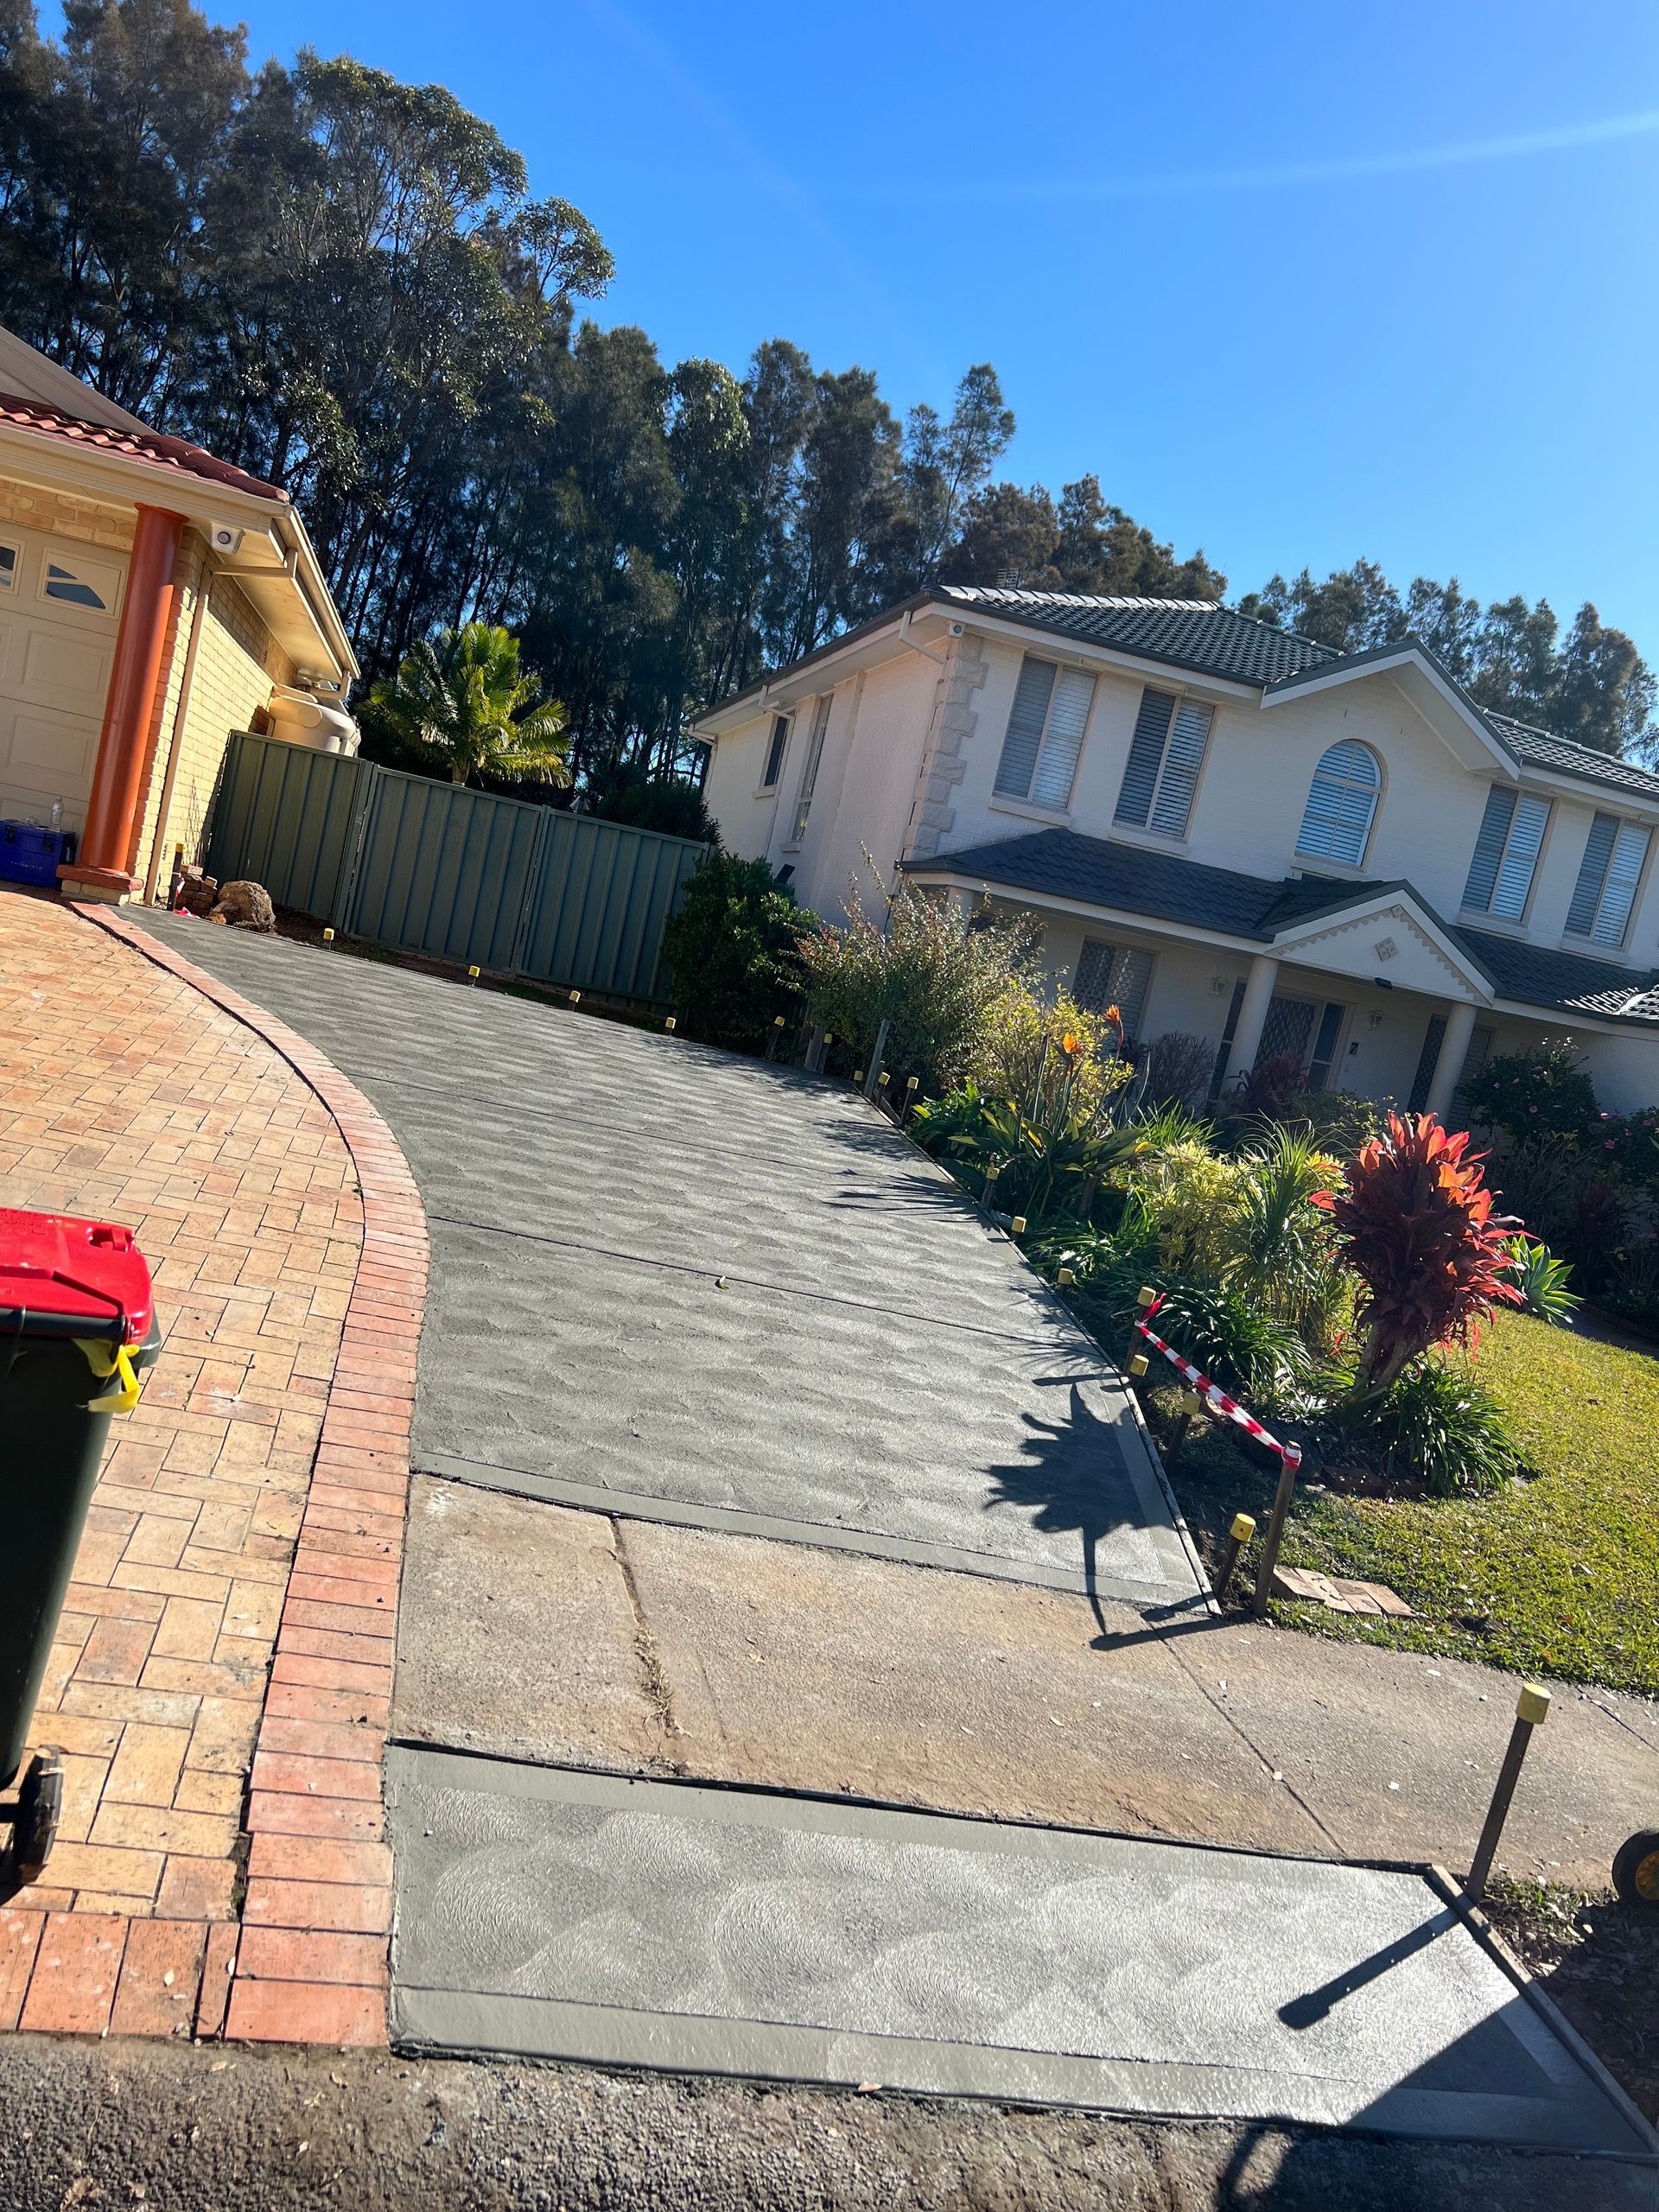 House With Walkout Deck and Concrete Walkway — Contact Our Concreters in Wyong NSW